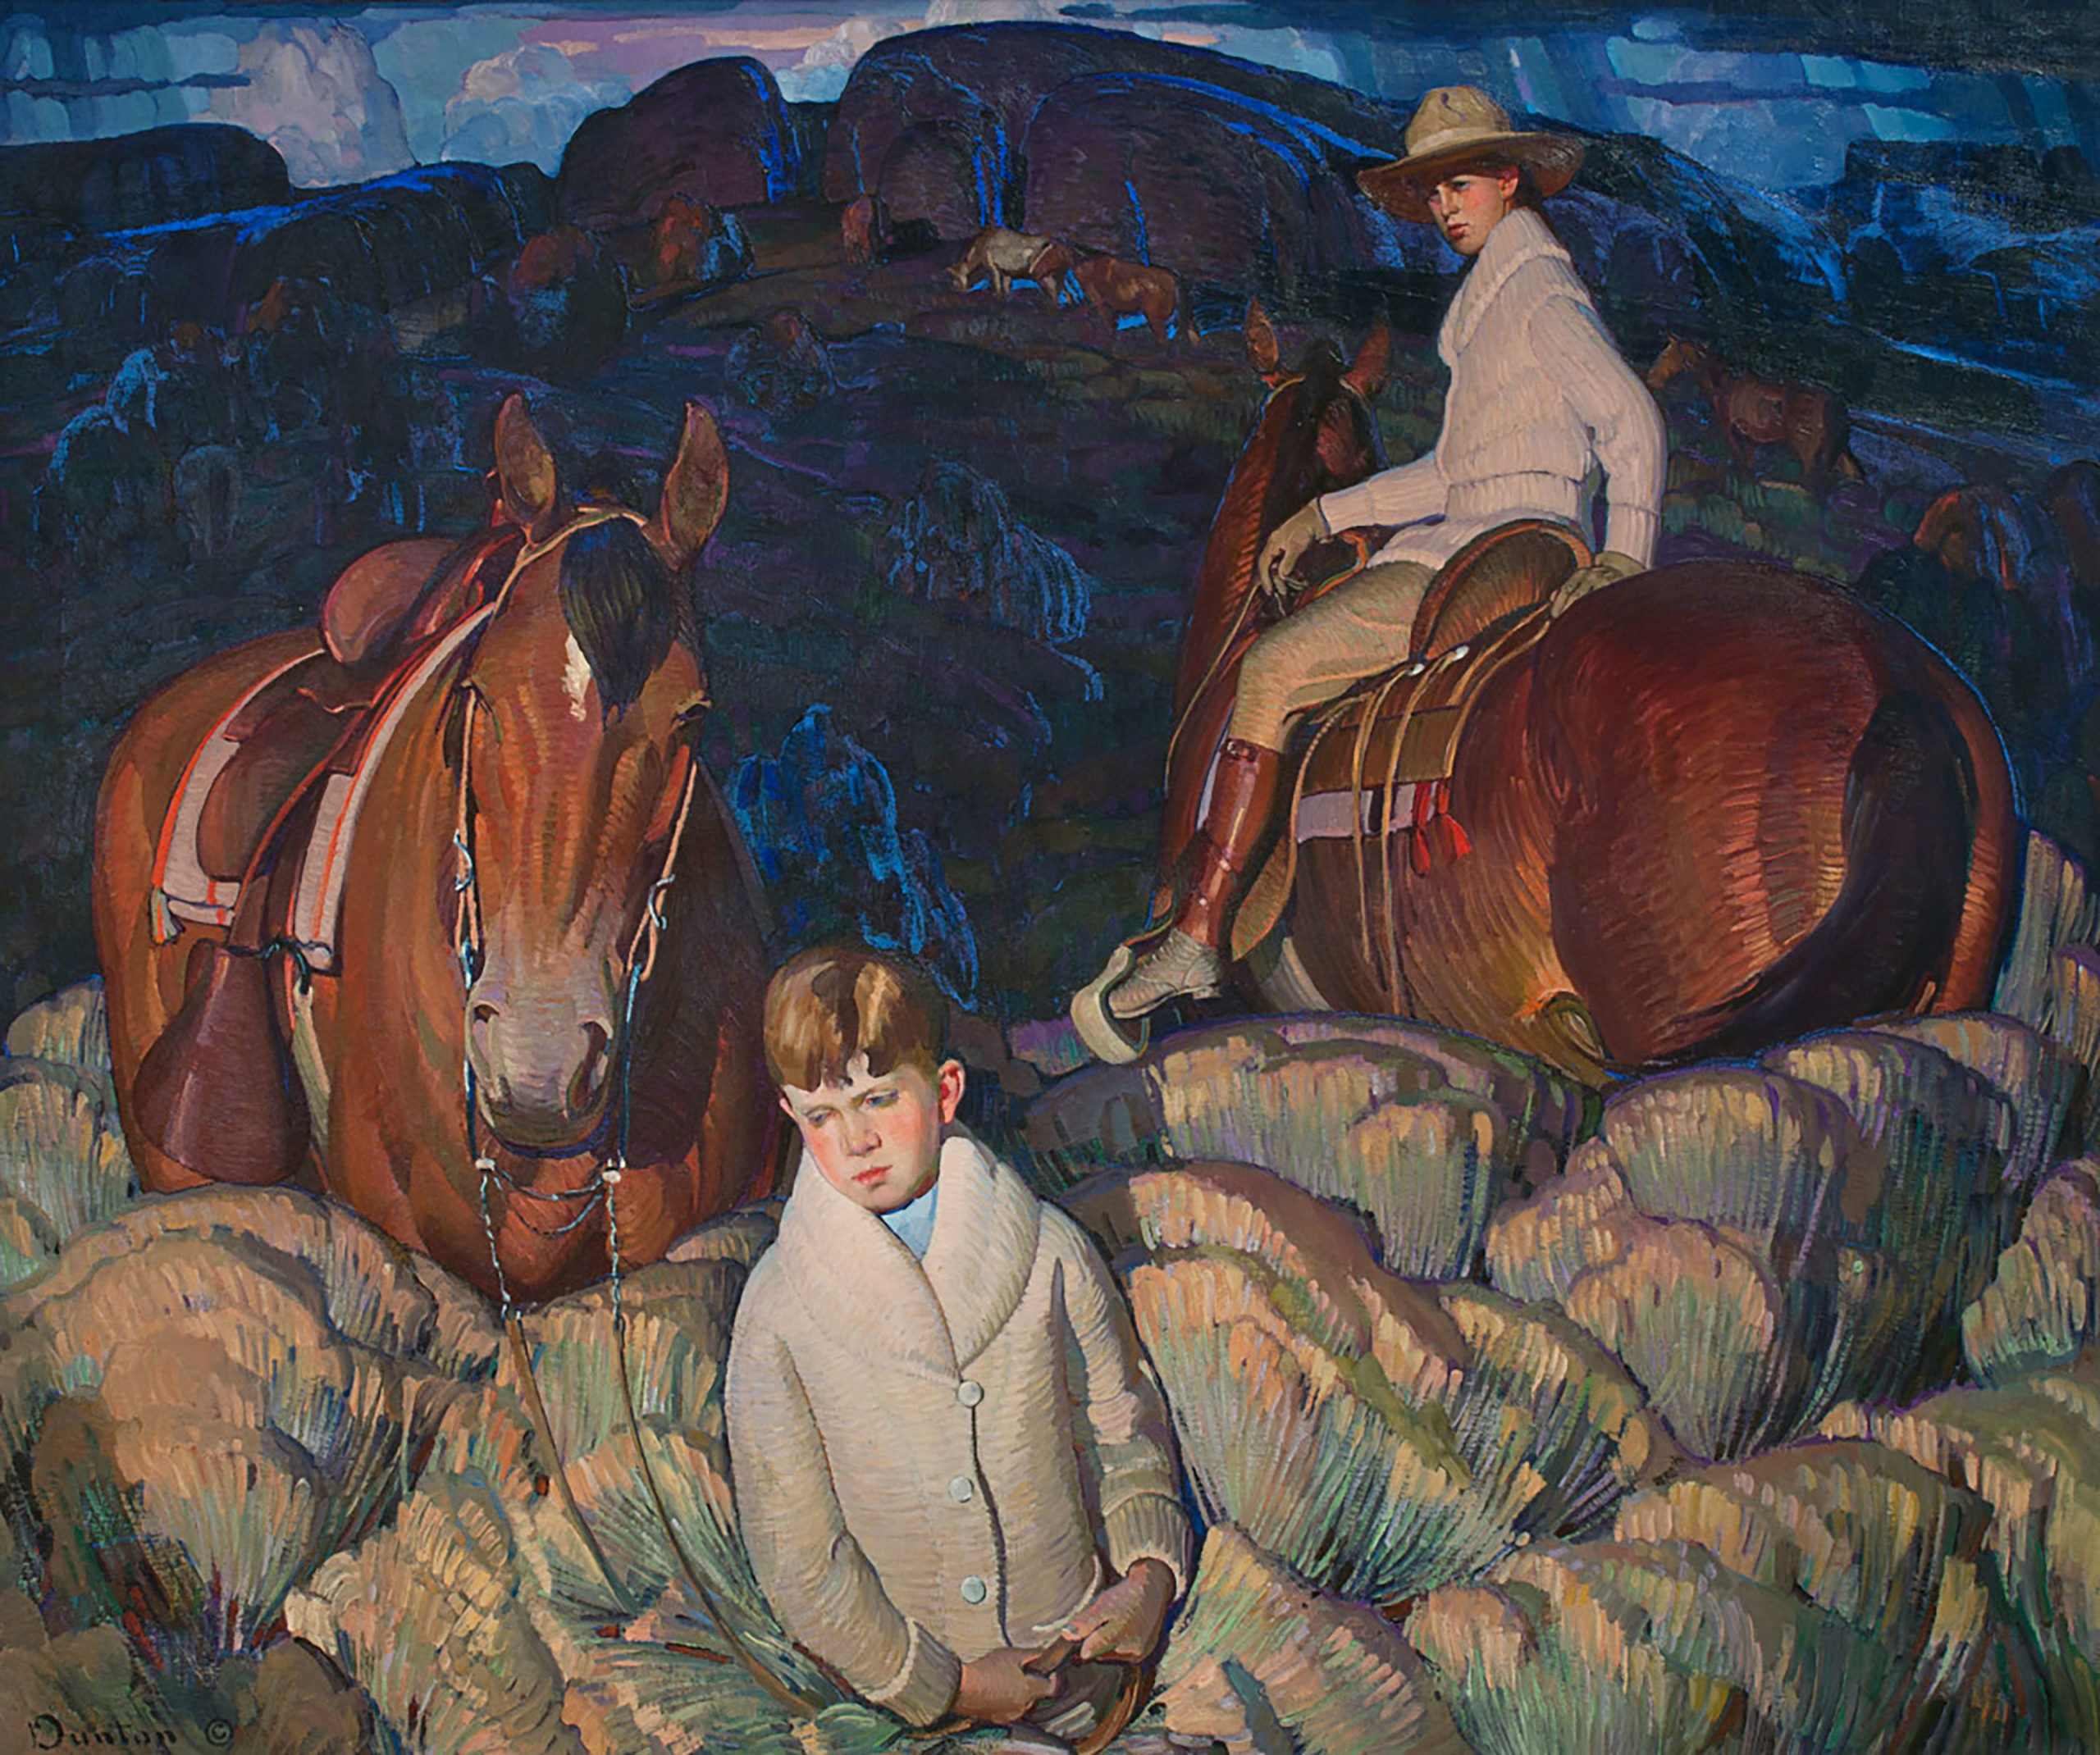 W. Herbert Dunton, My Children, 1920. Oil on canvas, 50 x 60 in. Collection of the New Mexico Museum of Art. Gift of a friend, 1927 (351.23P). Photo by Blair Clark.